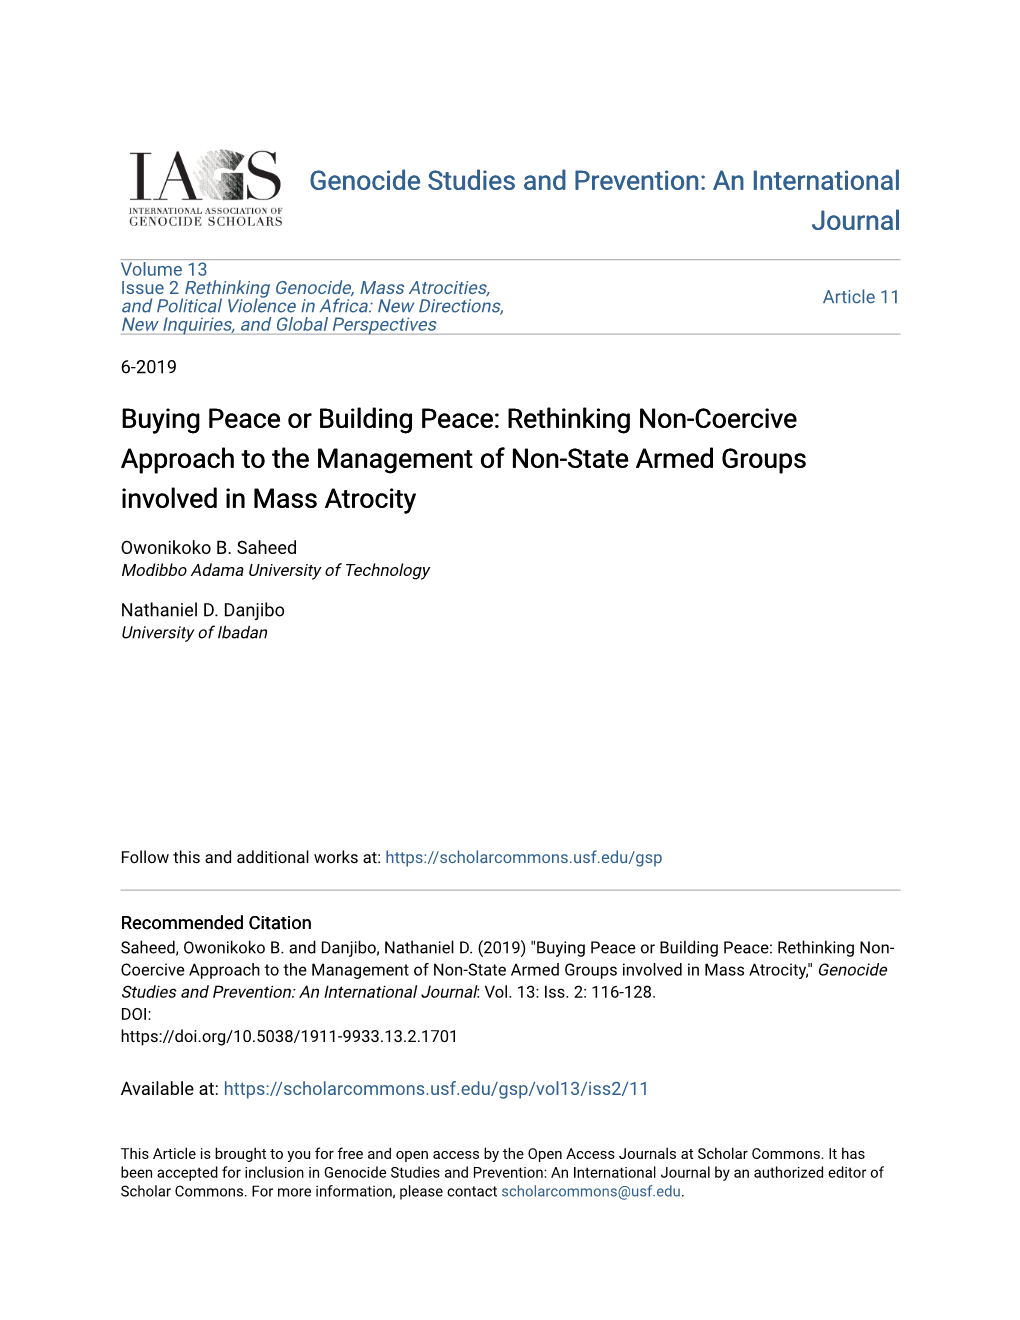 Buying Peace Or Building Peace: Rethinking Non-Coercive Approach to the Management of Non-State Armed Groups Involved in Mass Atrocity